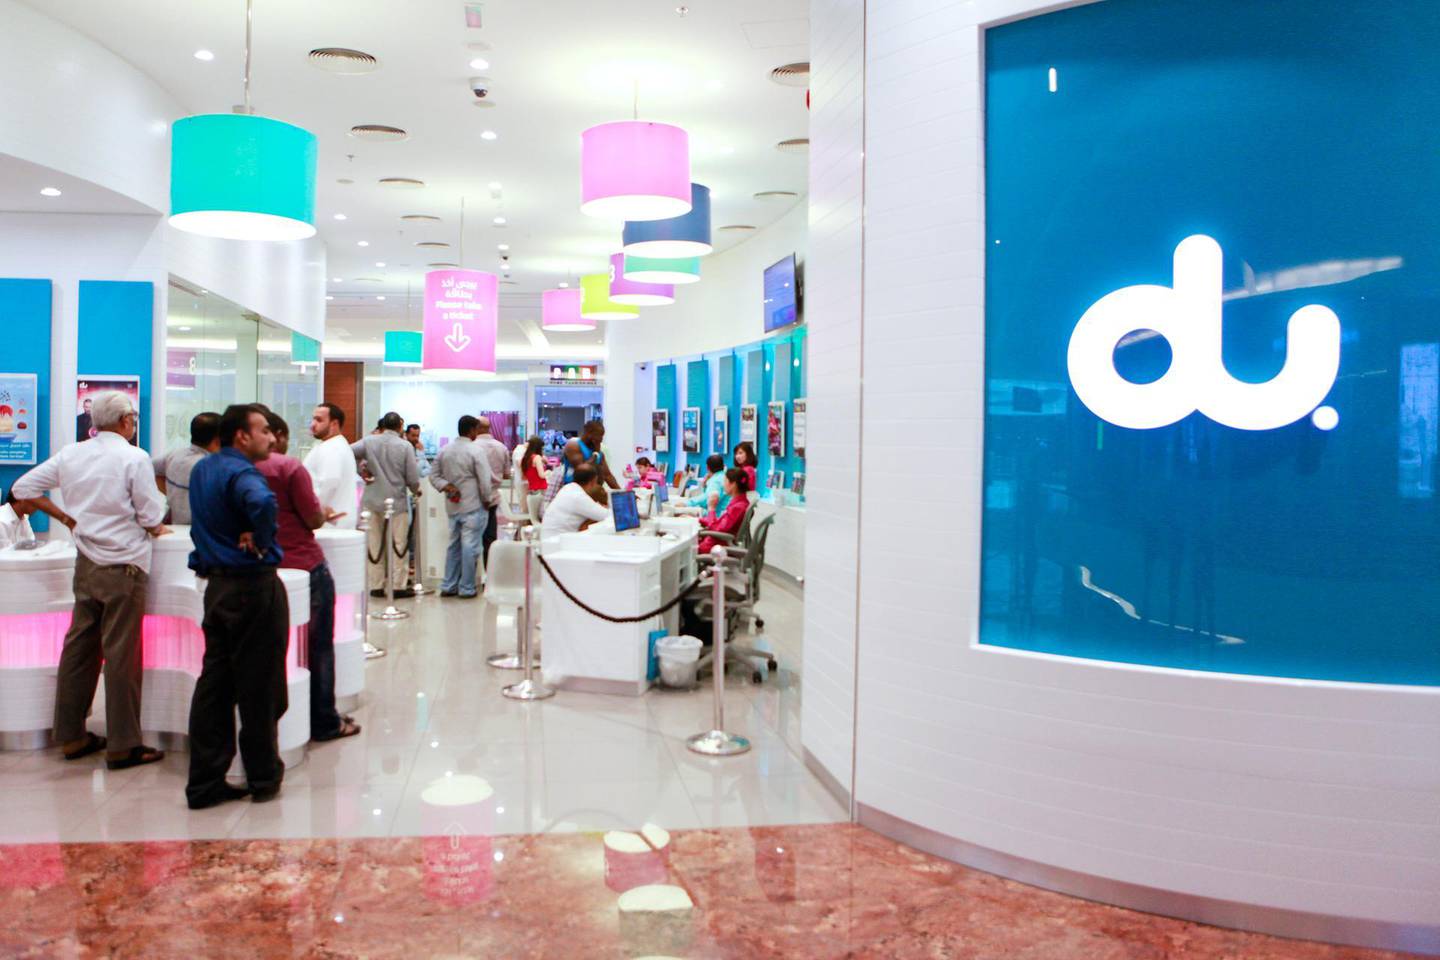 DUBAI, UAE. April 19, 2015 - Stock photograph of customers queuing at the Du store in Al Ghurair Center in Dubai, April 19, 2015. (Photos by: Sarah Dea/The National, Story by: Standalone, Stock) *** Local Caption ***  SDEA190415-du_stock02.JPG